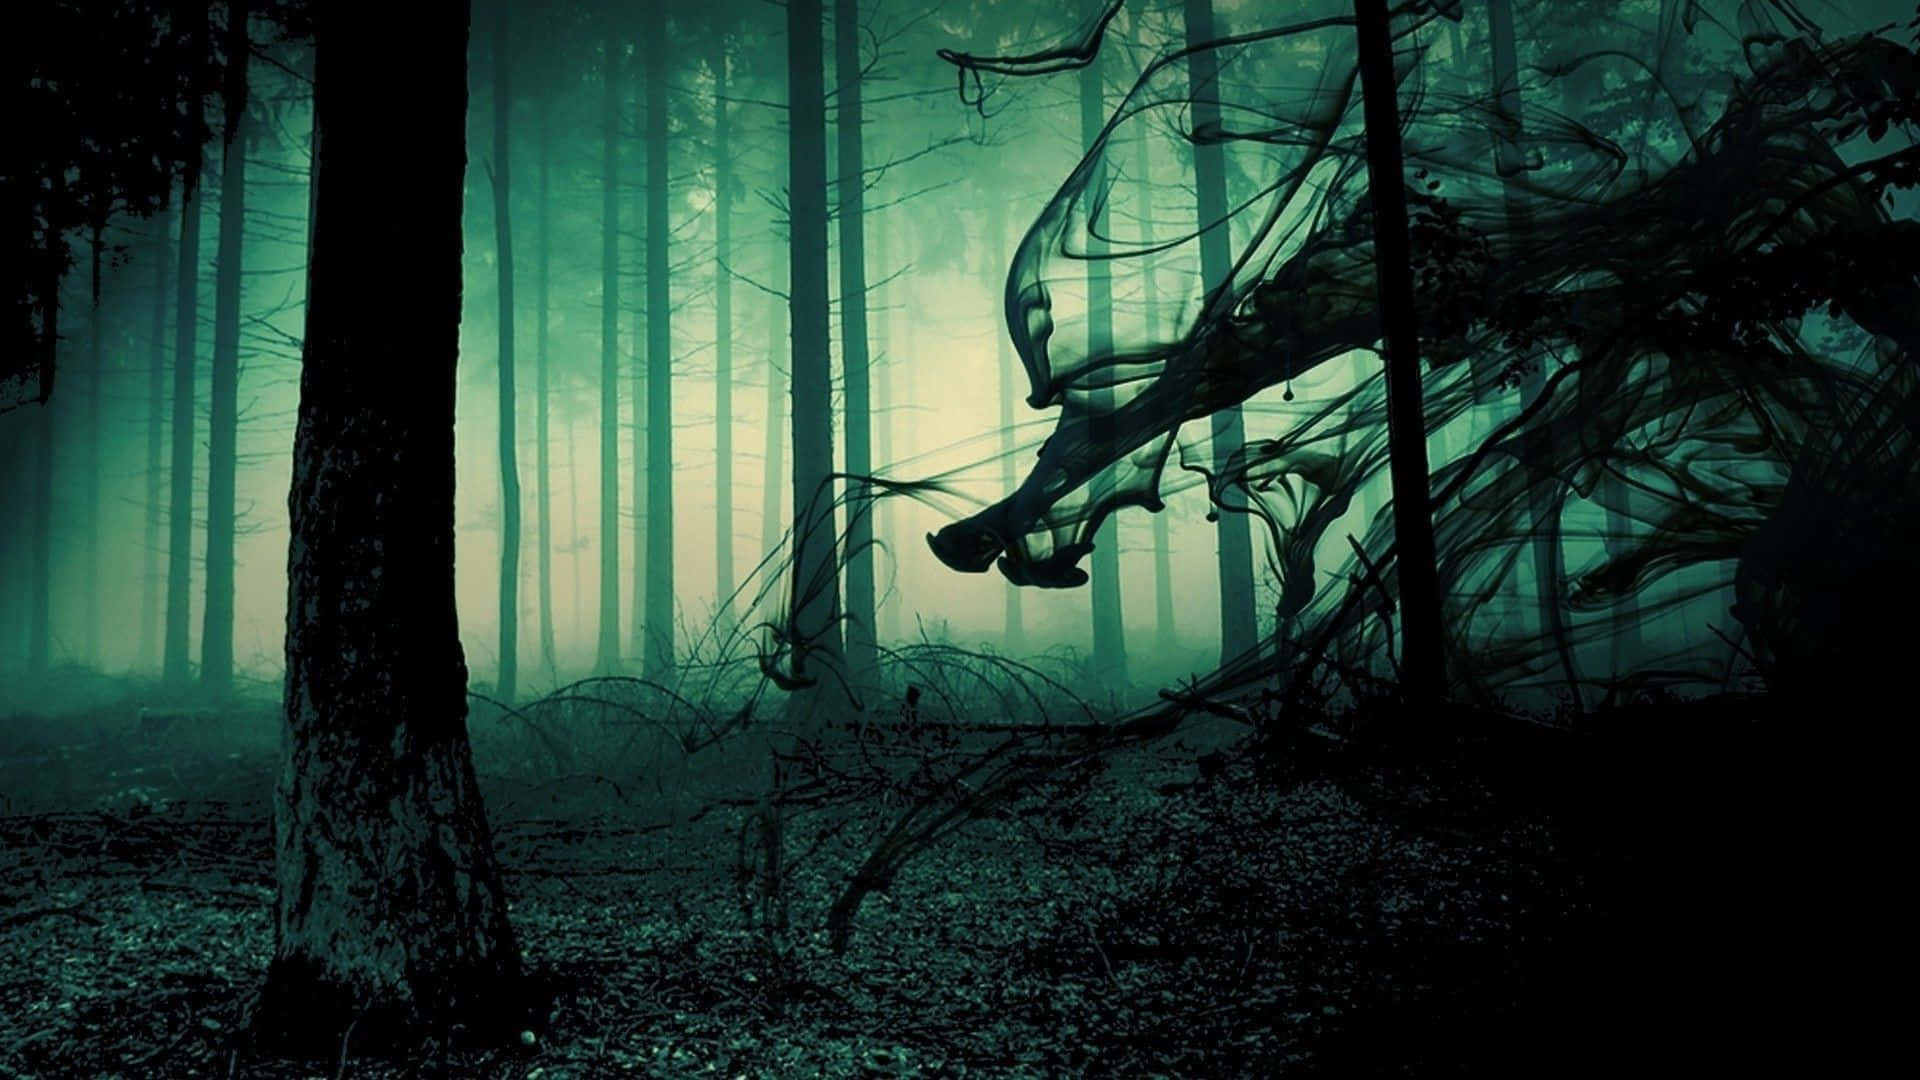 "The darkness of the Haunted Forest beckons." Wallpaper